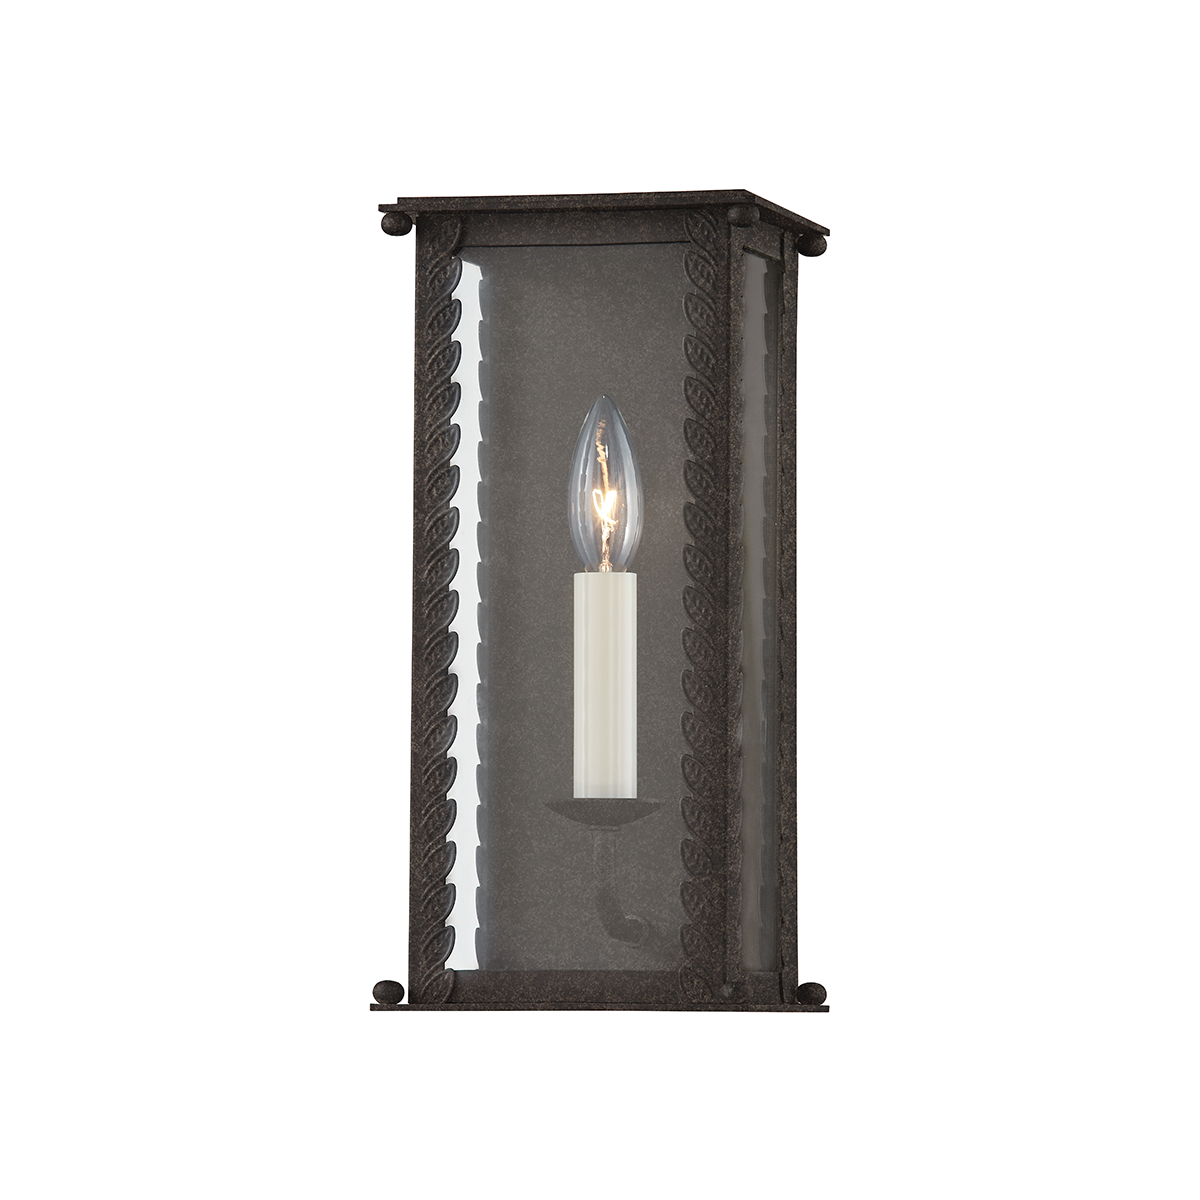 Troy Lighting 1 LIGHT SMALL EXTERIOR WALL SCONCE B6711